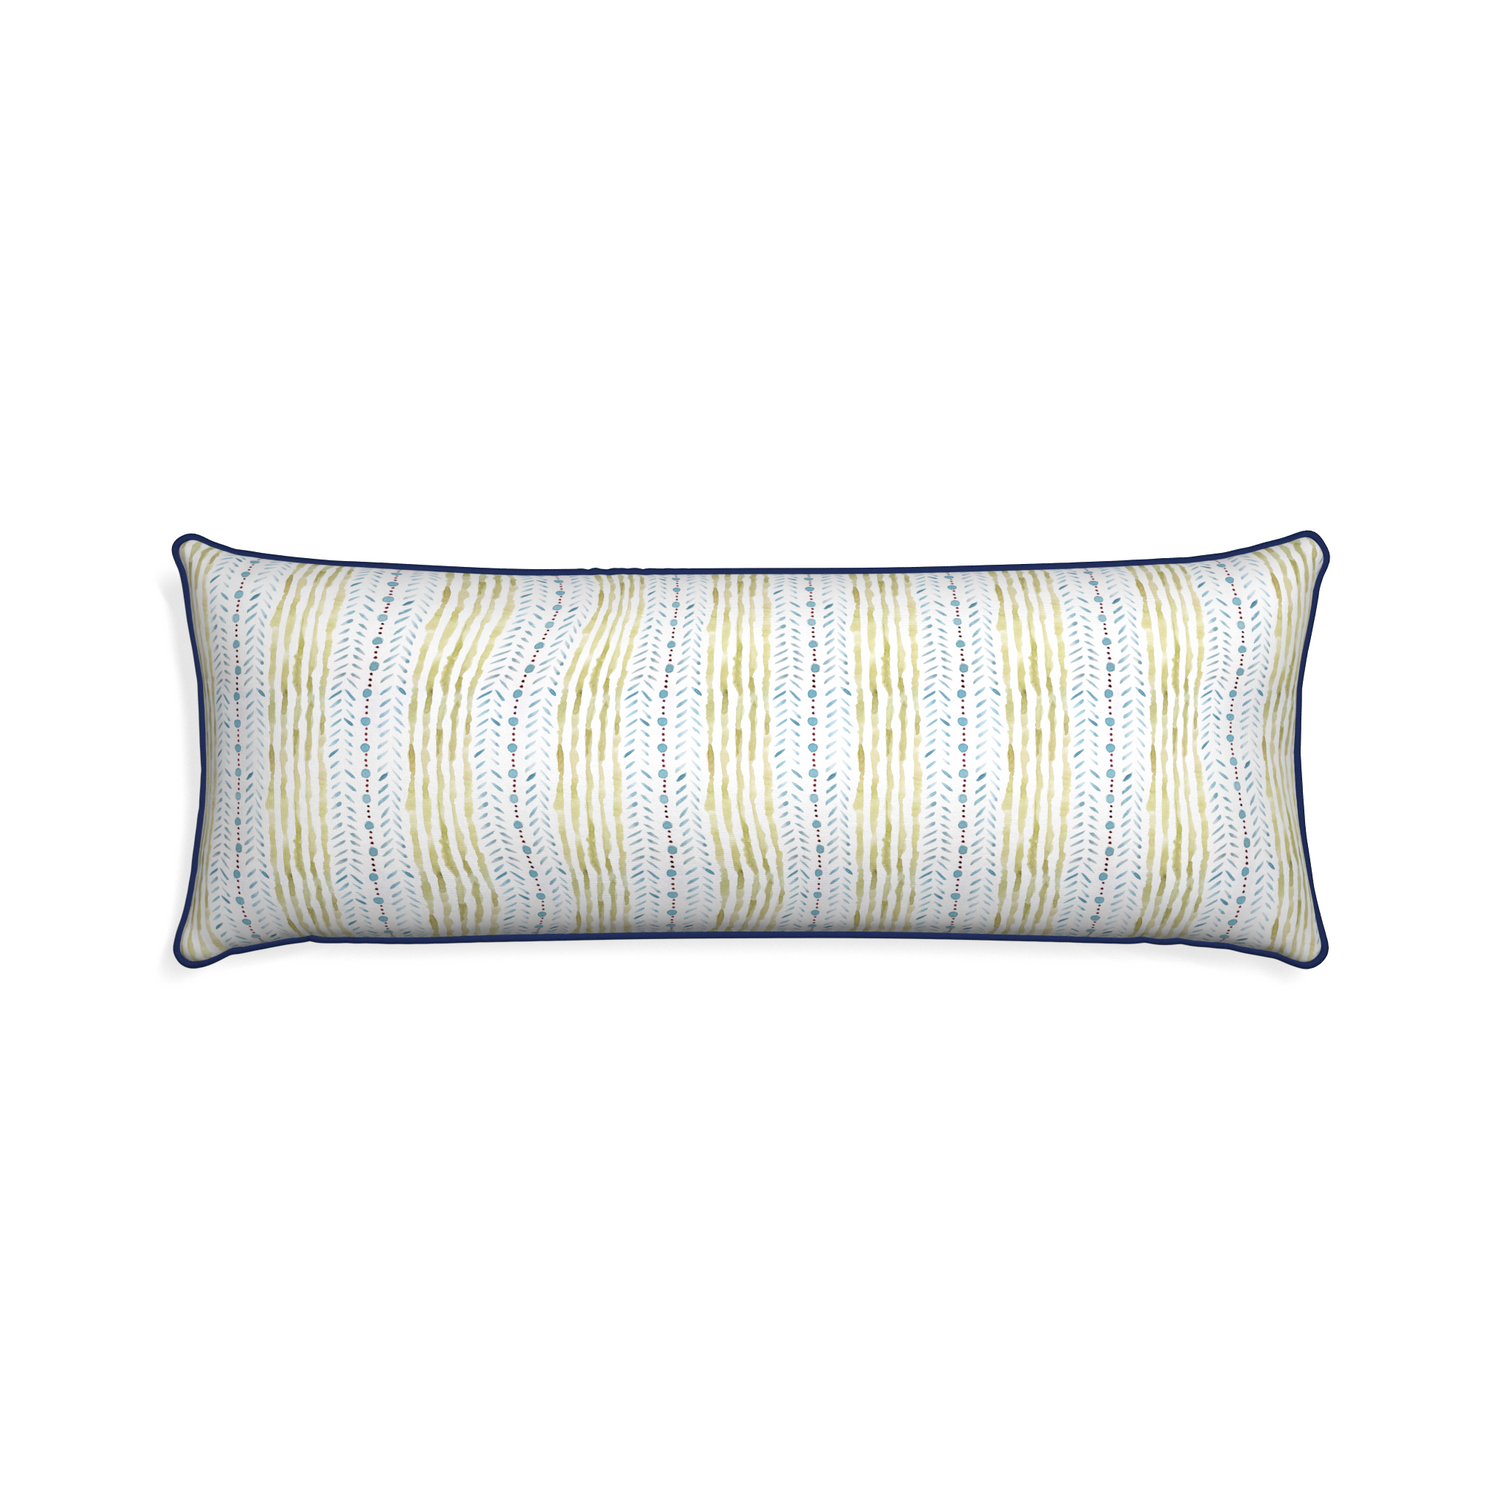 Xl-lumbar julia custom pillow with midnight piping on white background